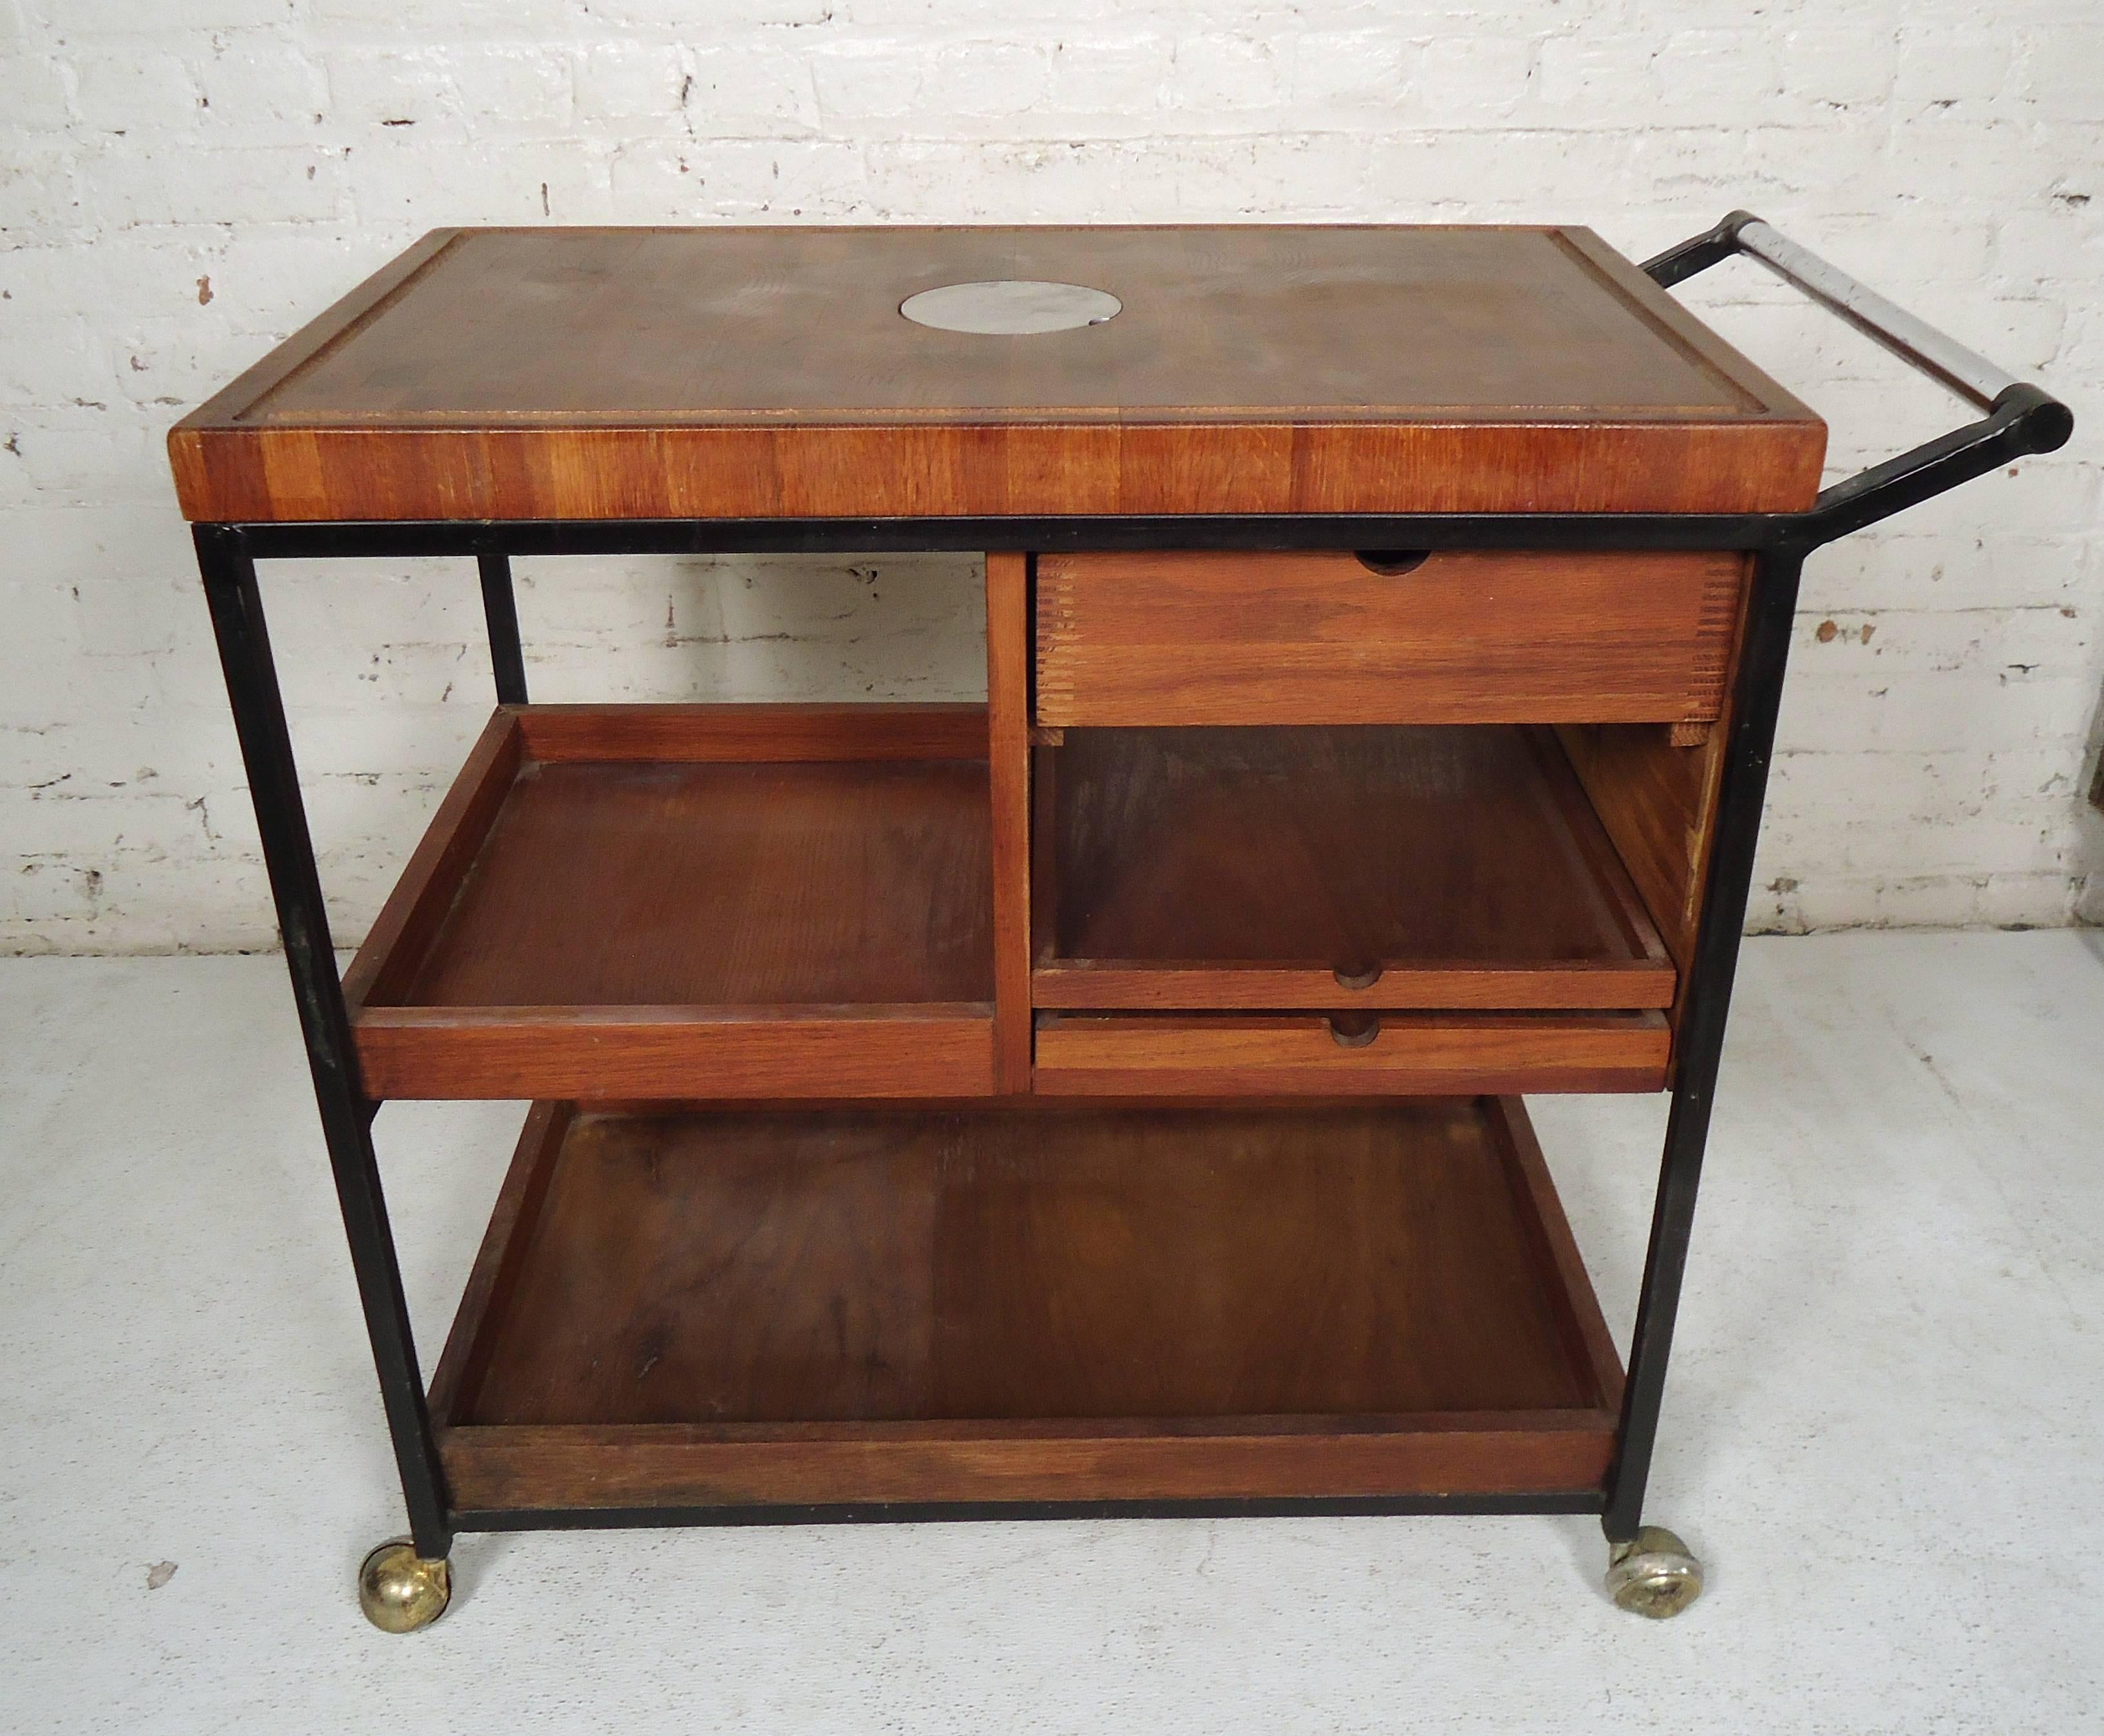 Mid-Century Modern rolling cart features thick butcher block top, shelving and tiers for storage use.

Please confirm item location (NY or NJ).